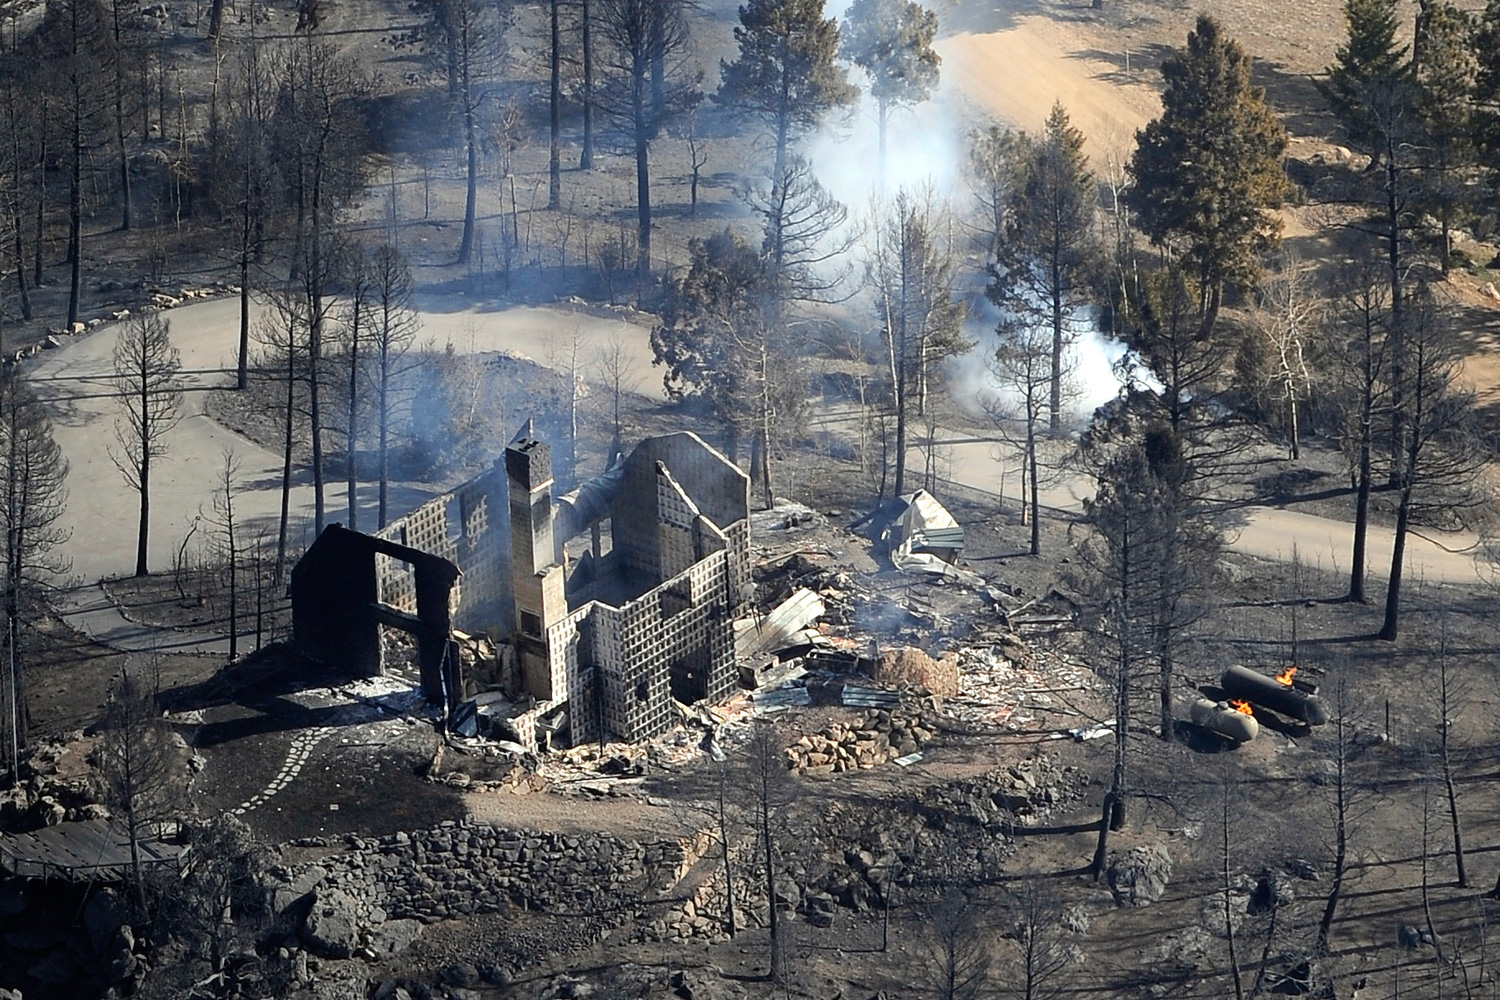 March 27, 2012. Arial images of the Lower North Fork Wildfire near Denver.